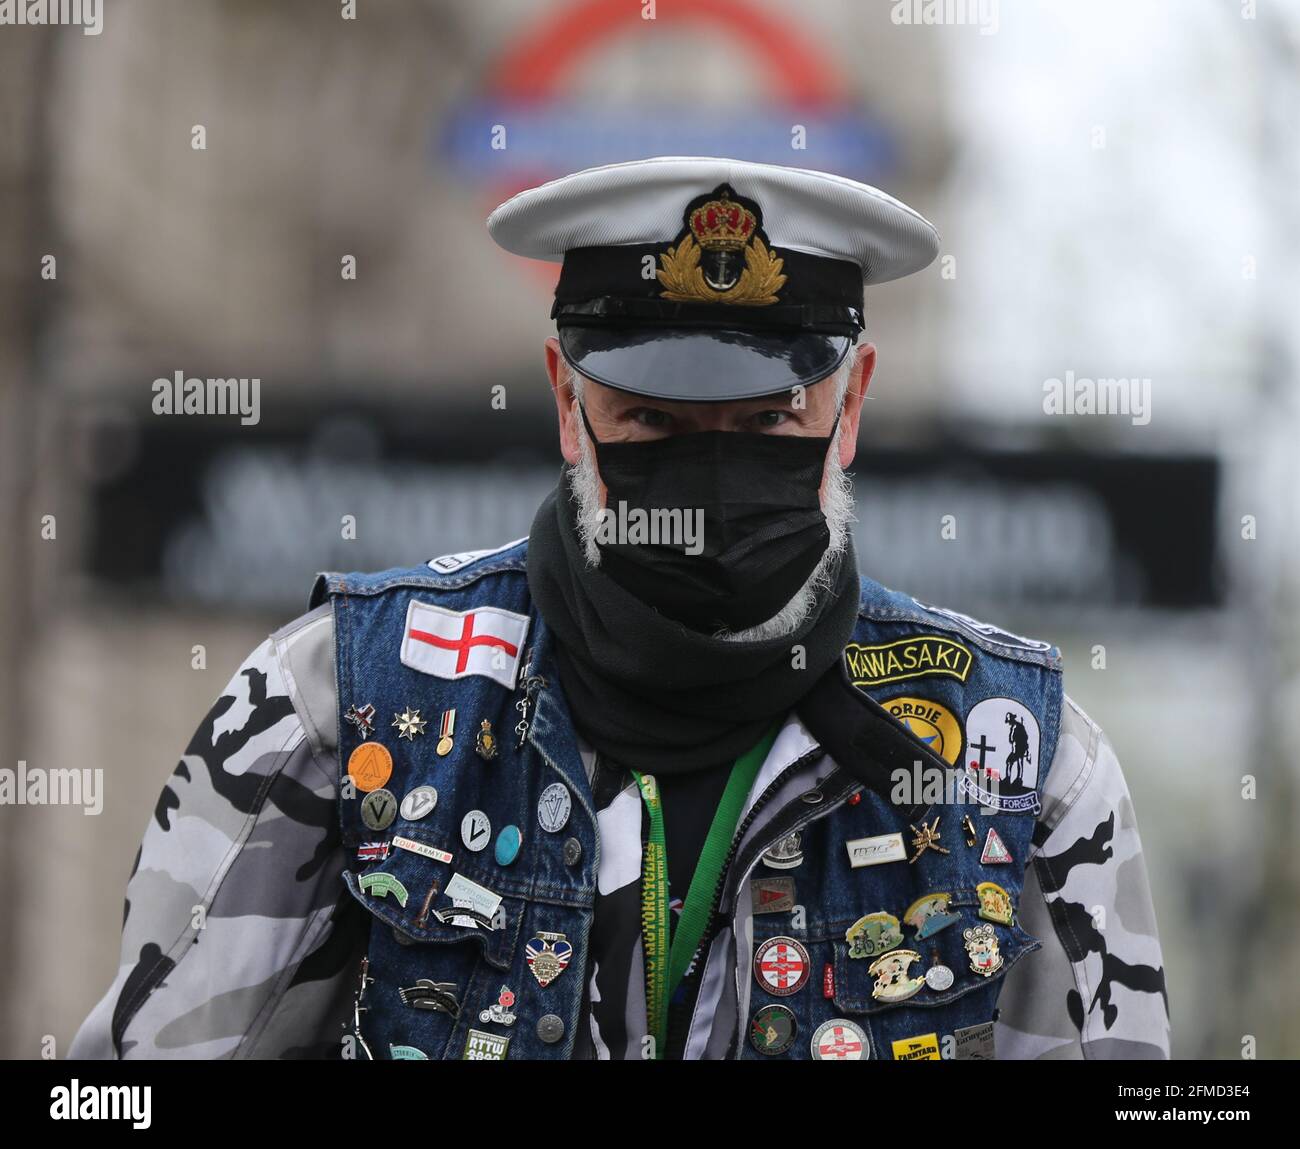 London, England, UK. 8th May, 2021. Protesters staged 'Respect our veterans''' rally London's Parliament Square after the controversial trial against two paratroopers accused of murdering Official IRA leader Joe McCann effectively collapsed in the UK. Credit: Tayfun Salci/ZUMA Wire/Alamy Live News Stock Photo